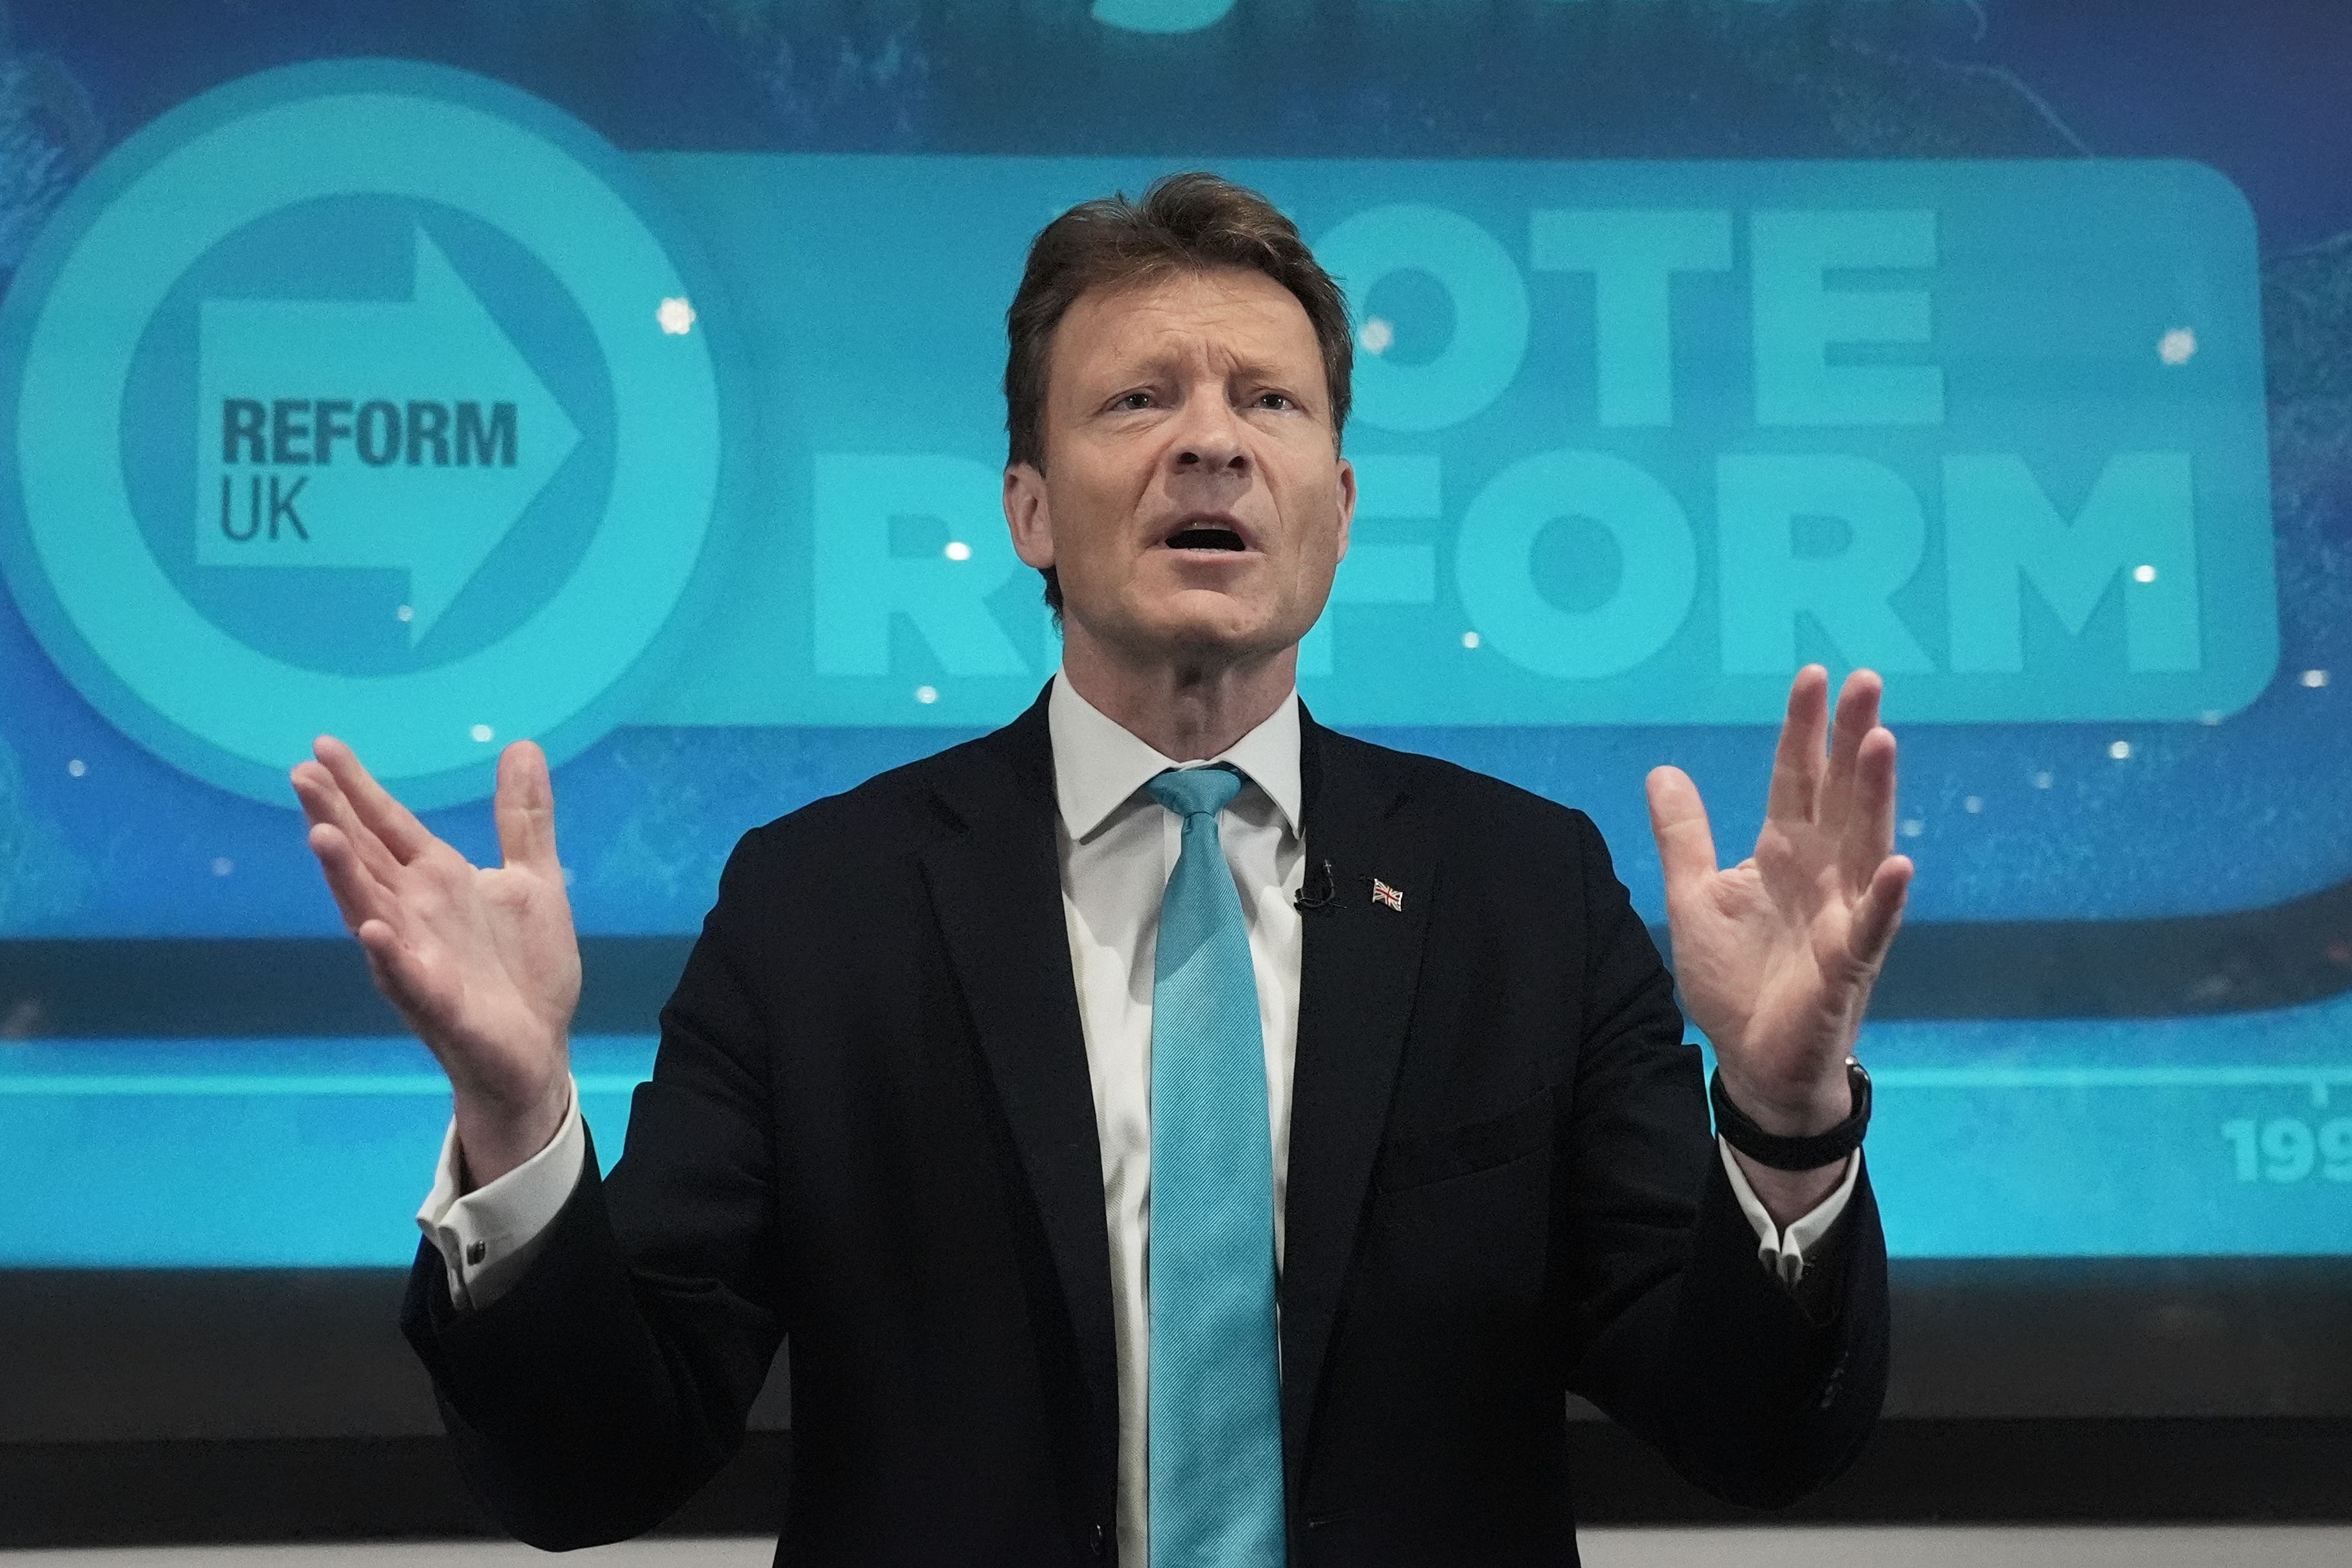 Leader of Reform UK Richard Tice speaking during a campaign launch